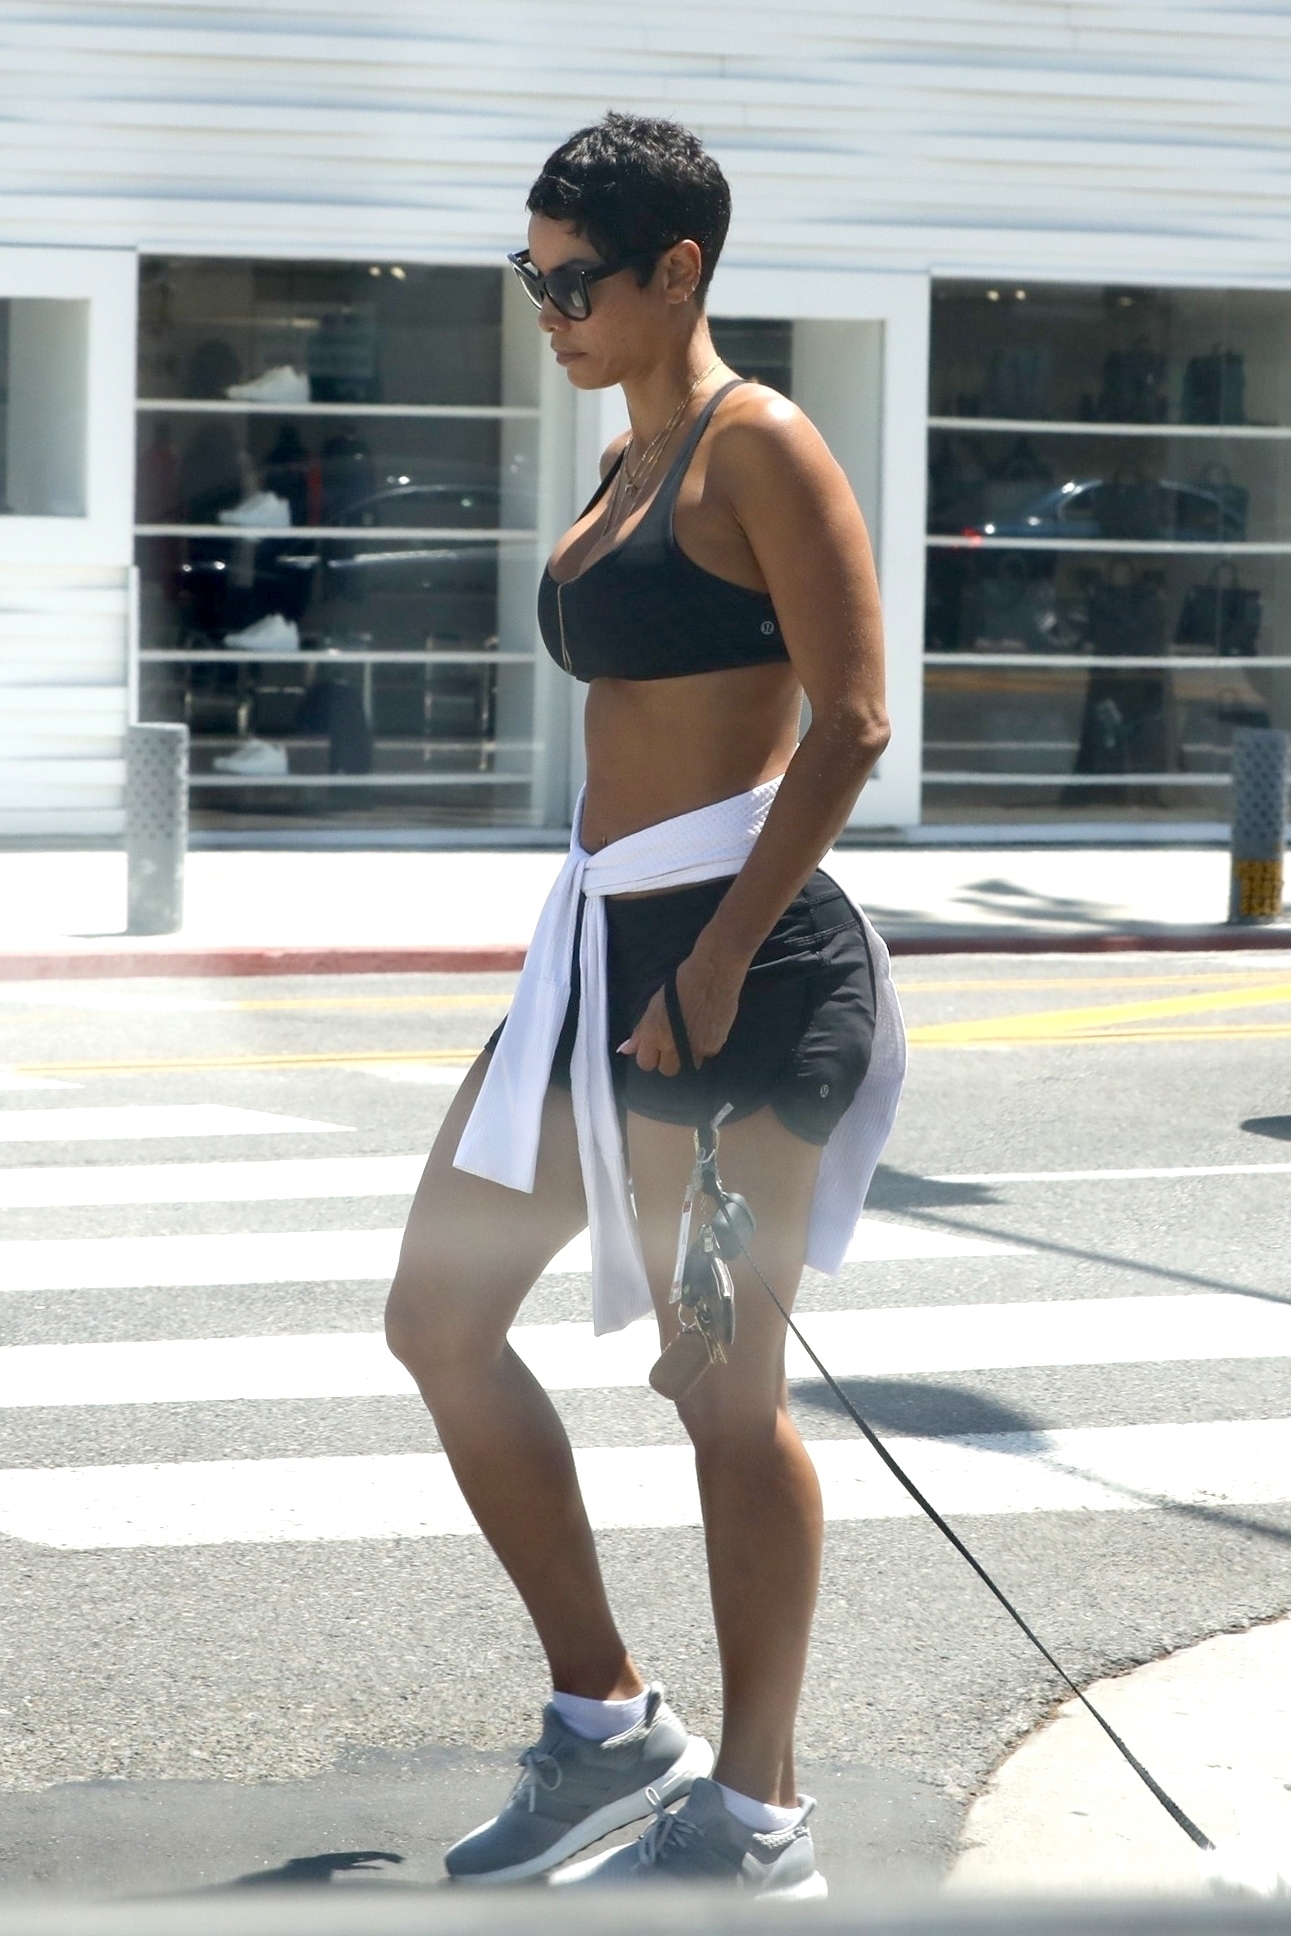 nicole-murphy-staying-cool-in-a-sports-bra-and-shorts-on-a-hot-day-in-beverly-hills-8318-1.jpg